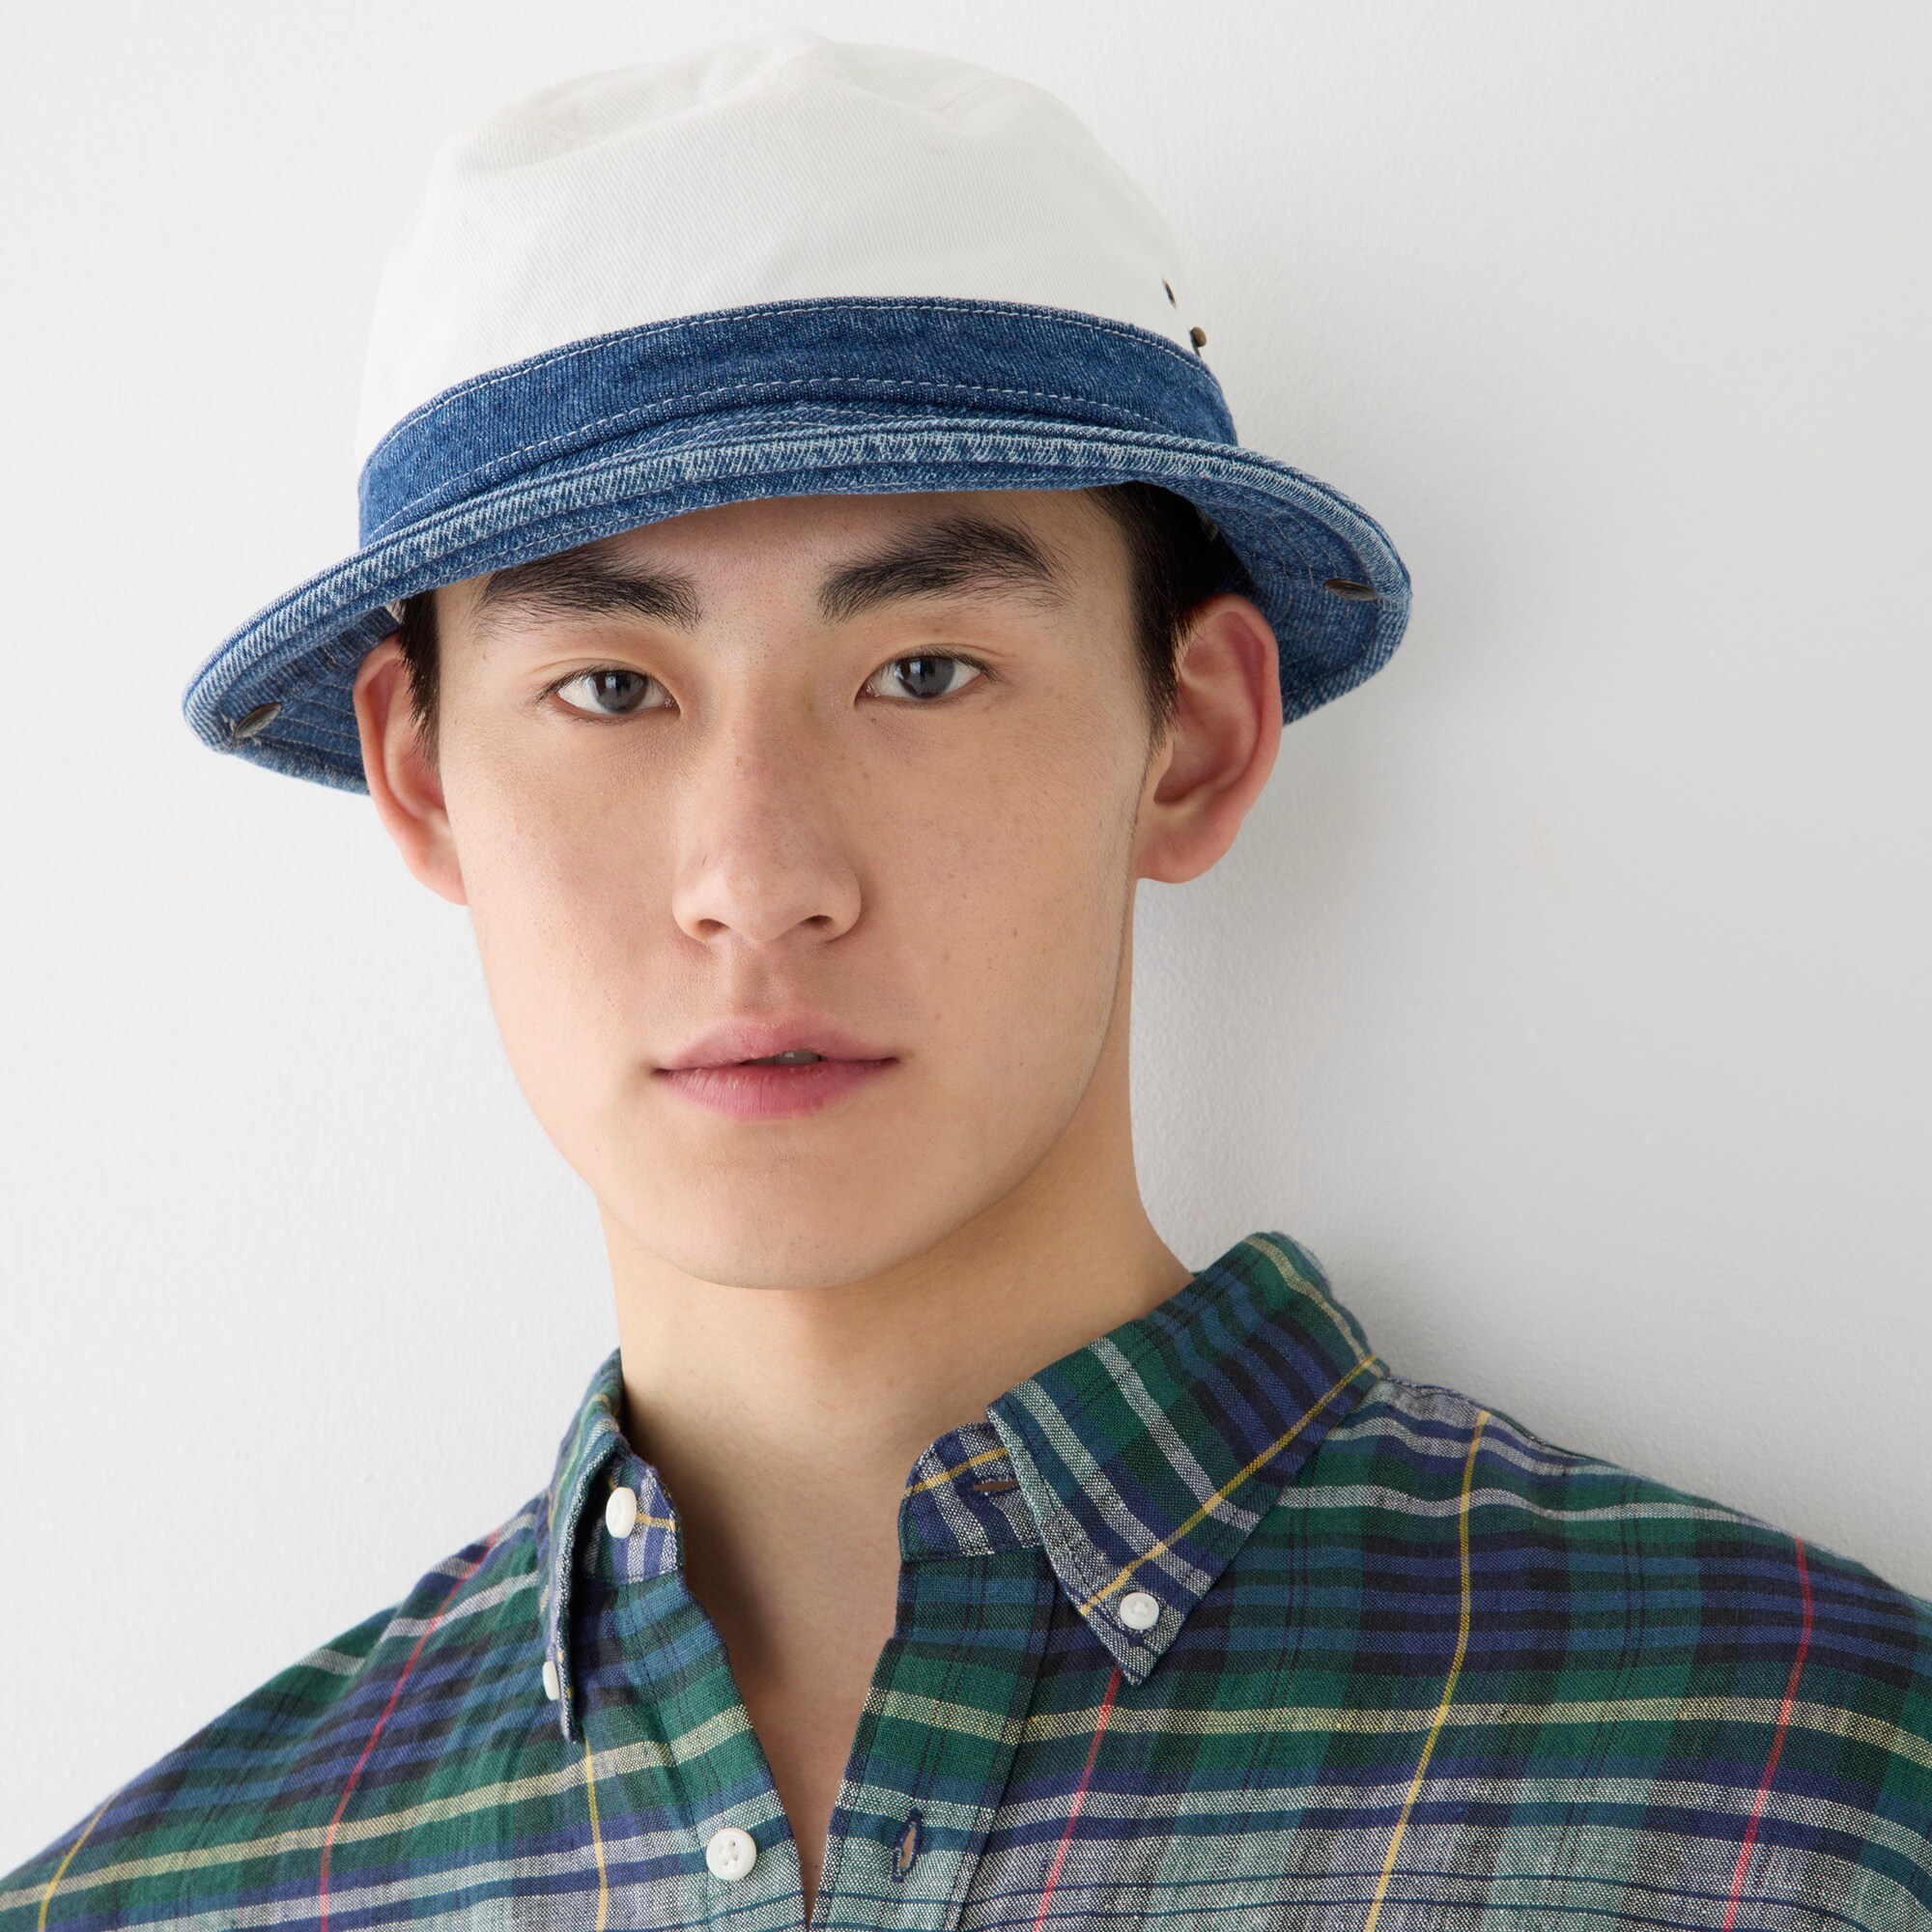 mens Bucket hat with snaps in denim twill